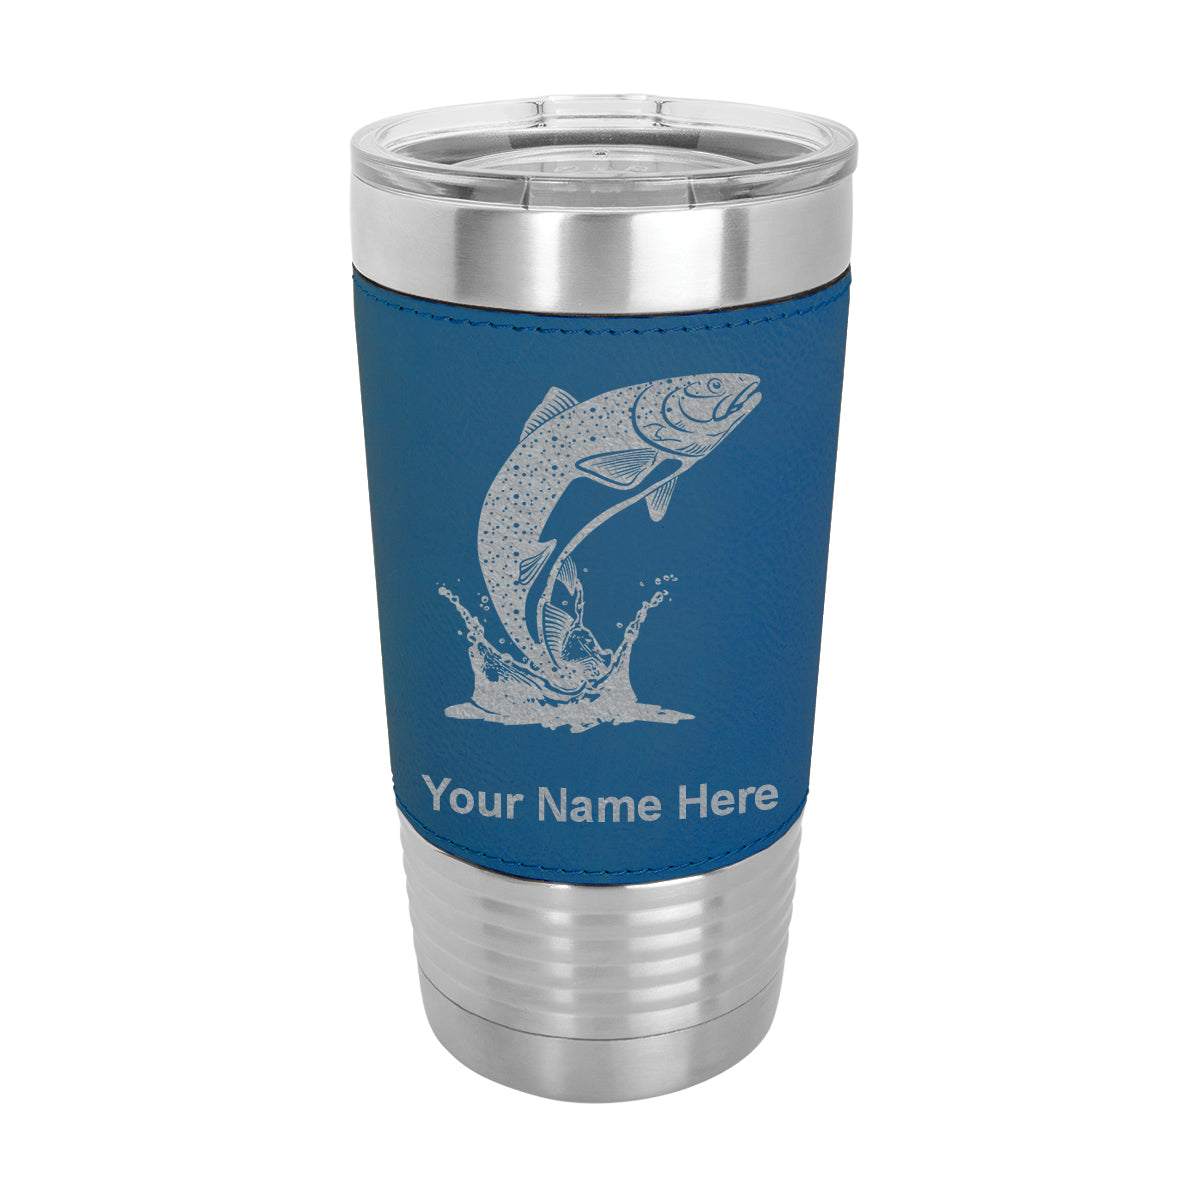 20oz Faux Leather Tumbler Mug, Trout Fish, Personalized Engraving Included